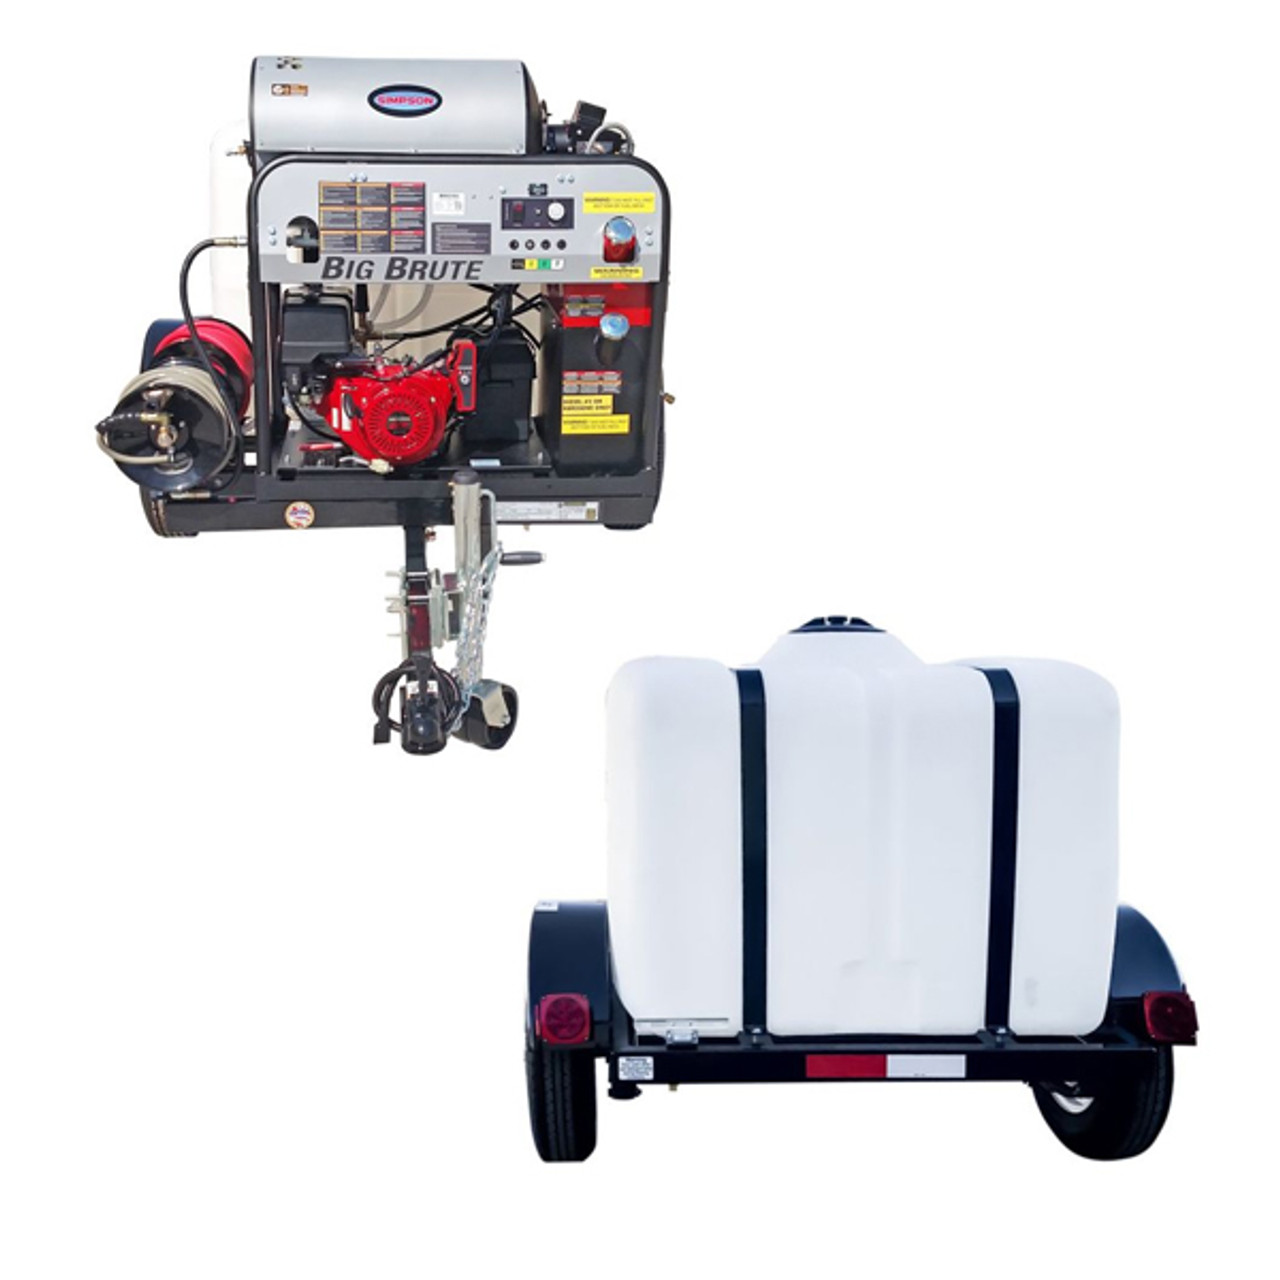 Simpson Hot Water Professional Gas Pressure Washer Trailer 4000 PSI - 95005